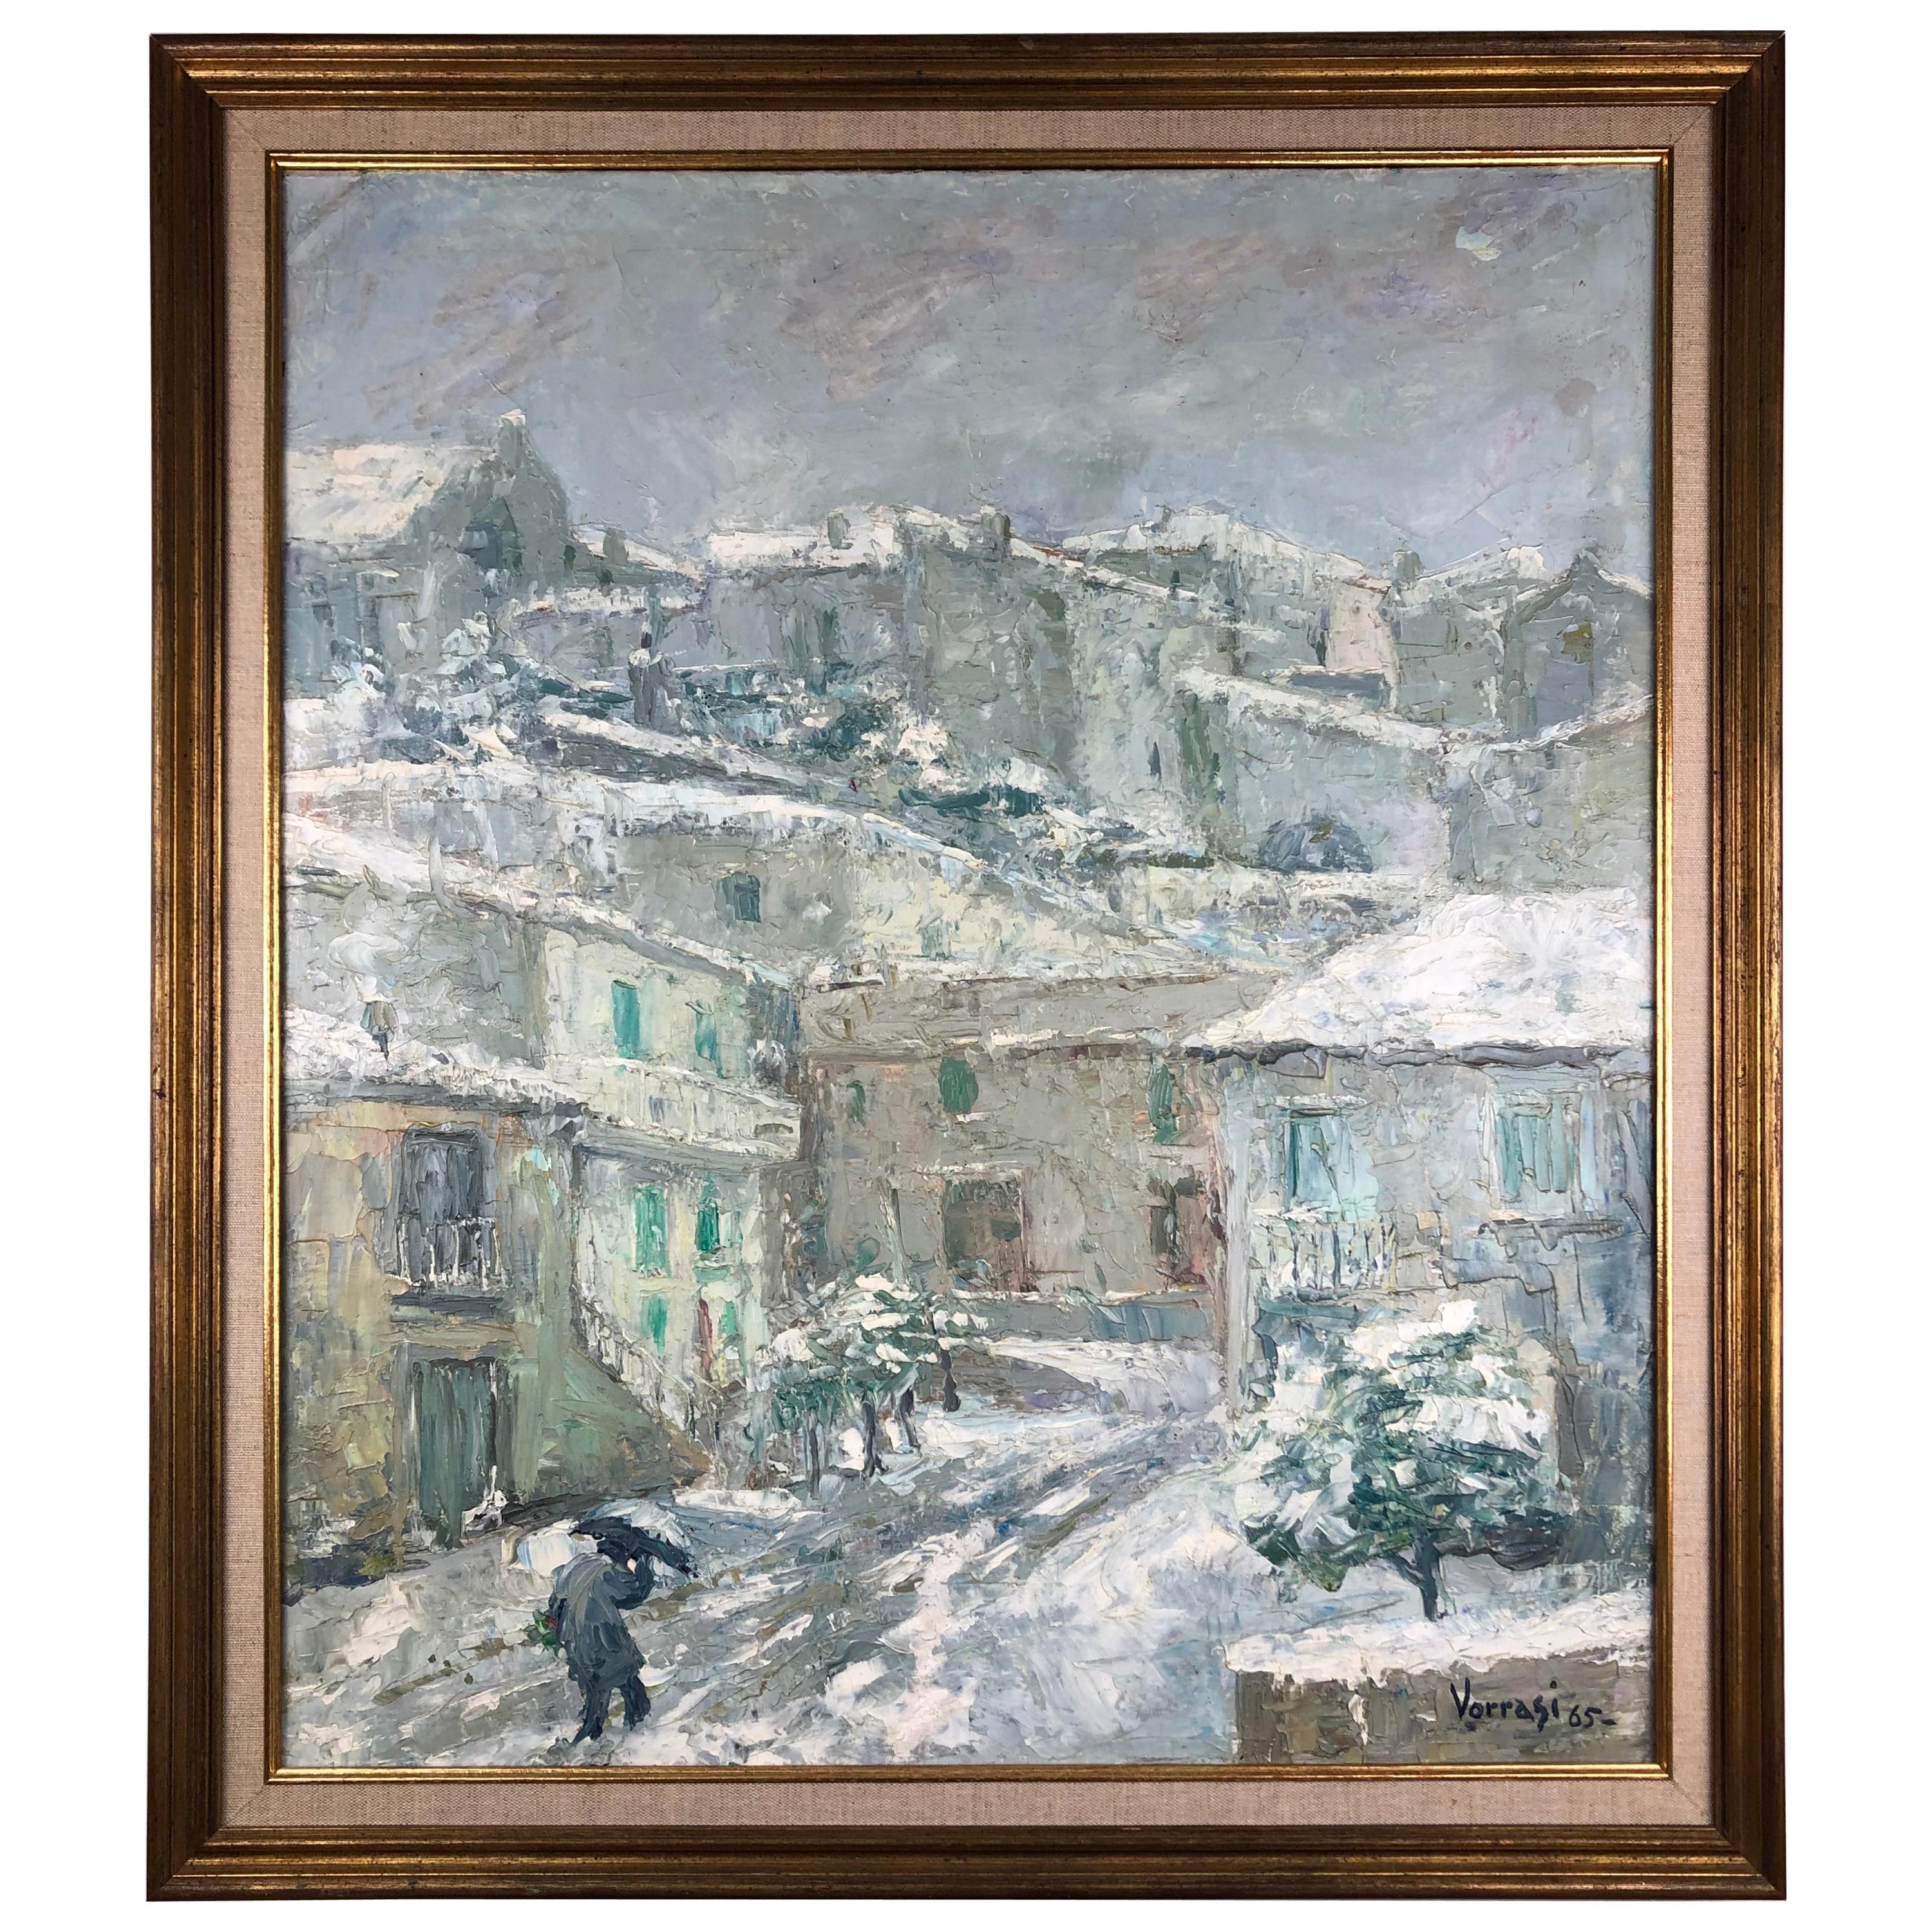 Original Painting on Canvas, Snow in an Italian Village Signed P. Vorrasi